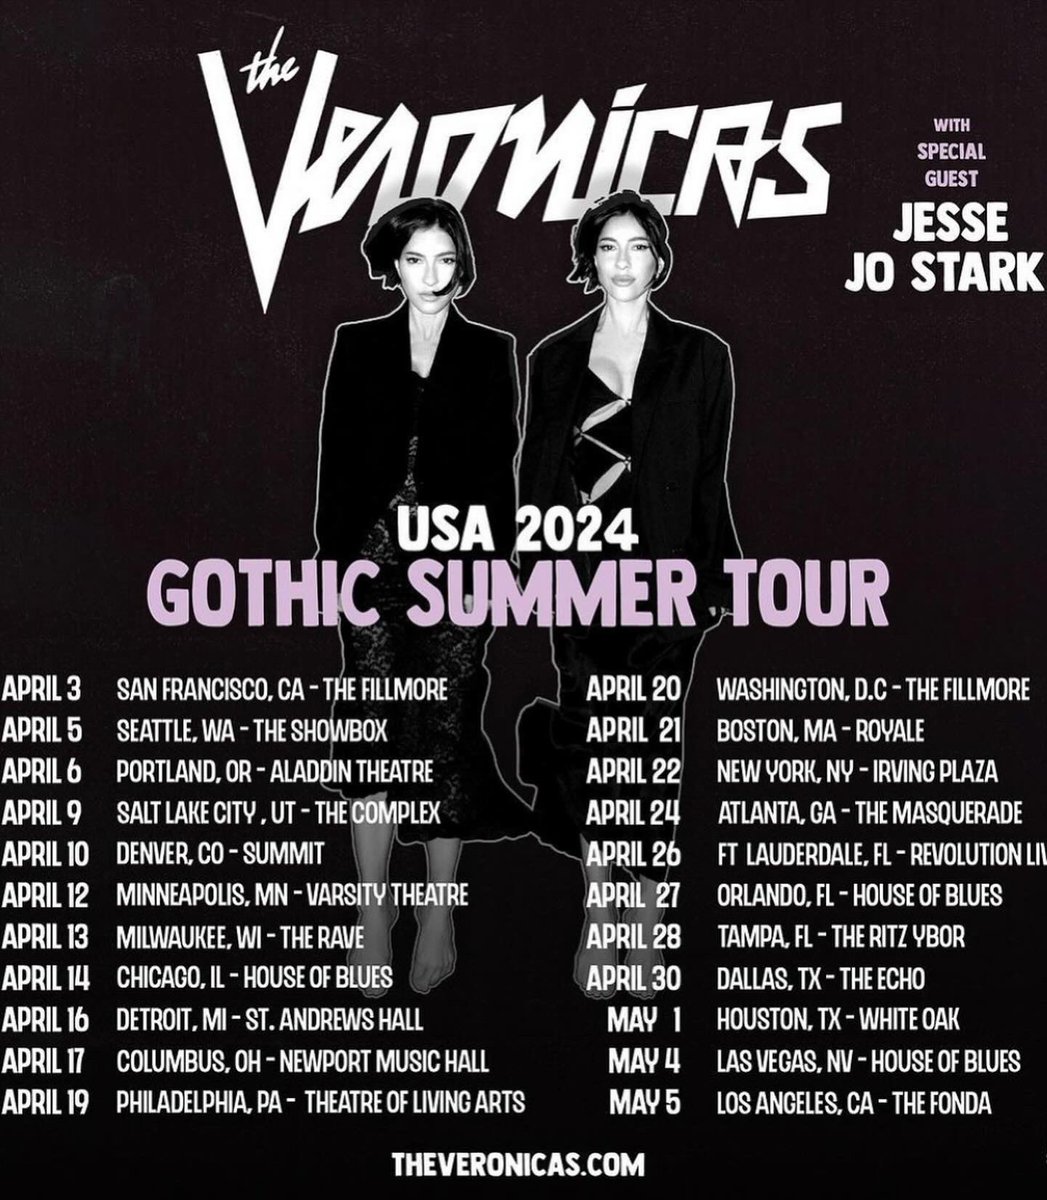 GOIN ON TOUR 🗡️🗡️ supportin @TheVeronicas in APRIL ! TICKETS ON SALE NOW 💗 on z road again!!! x